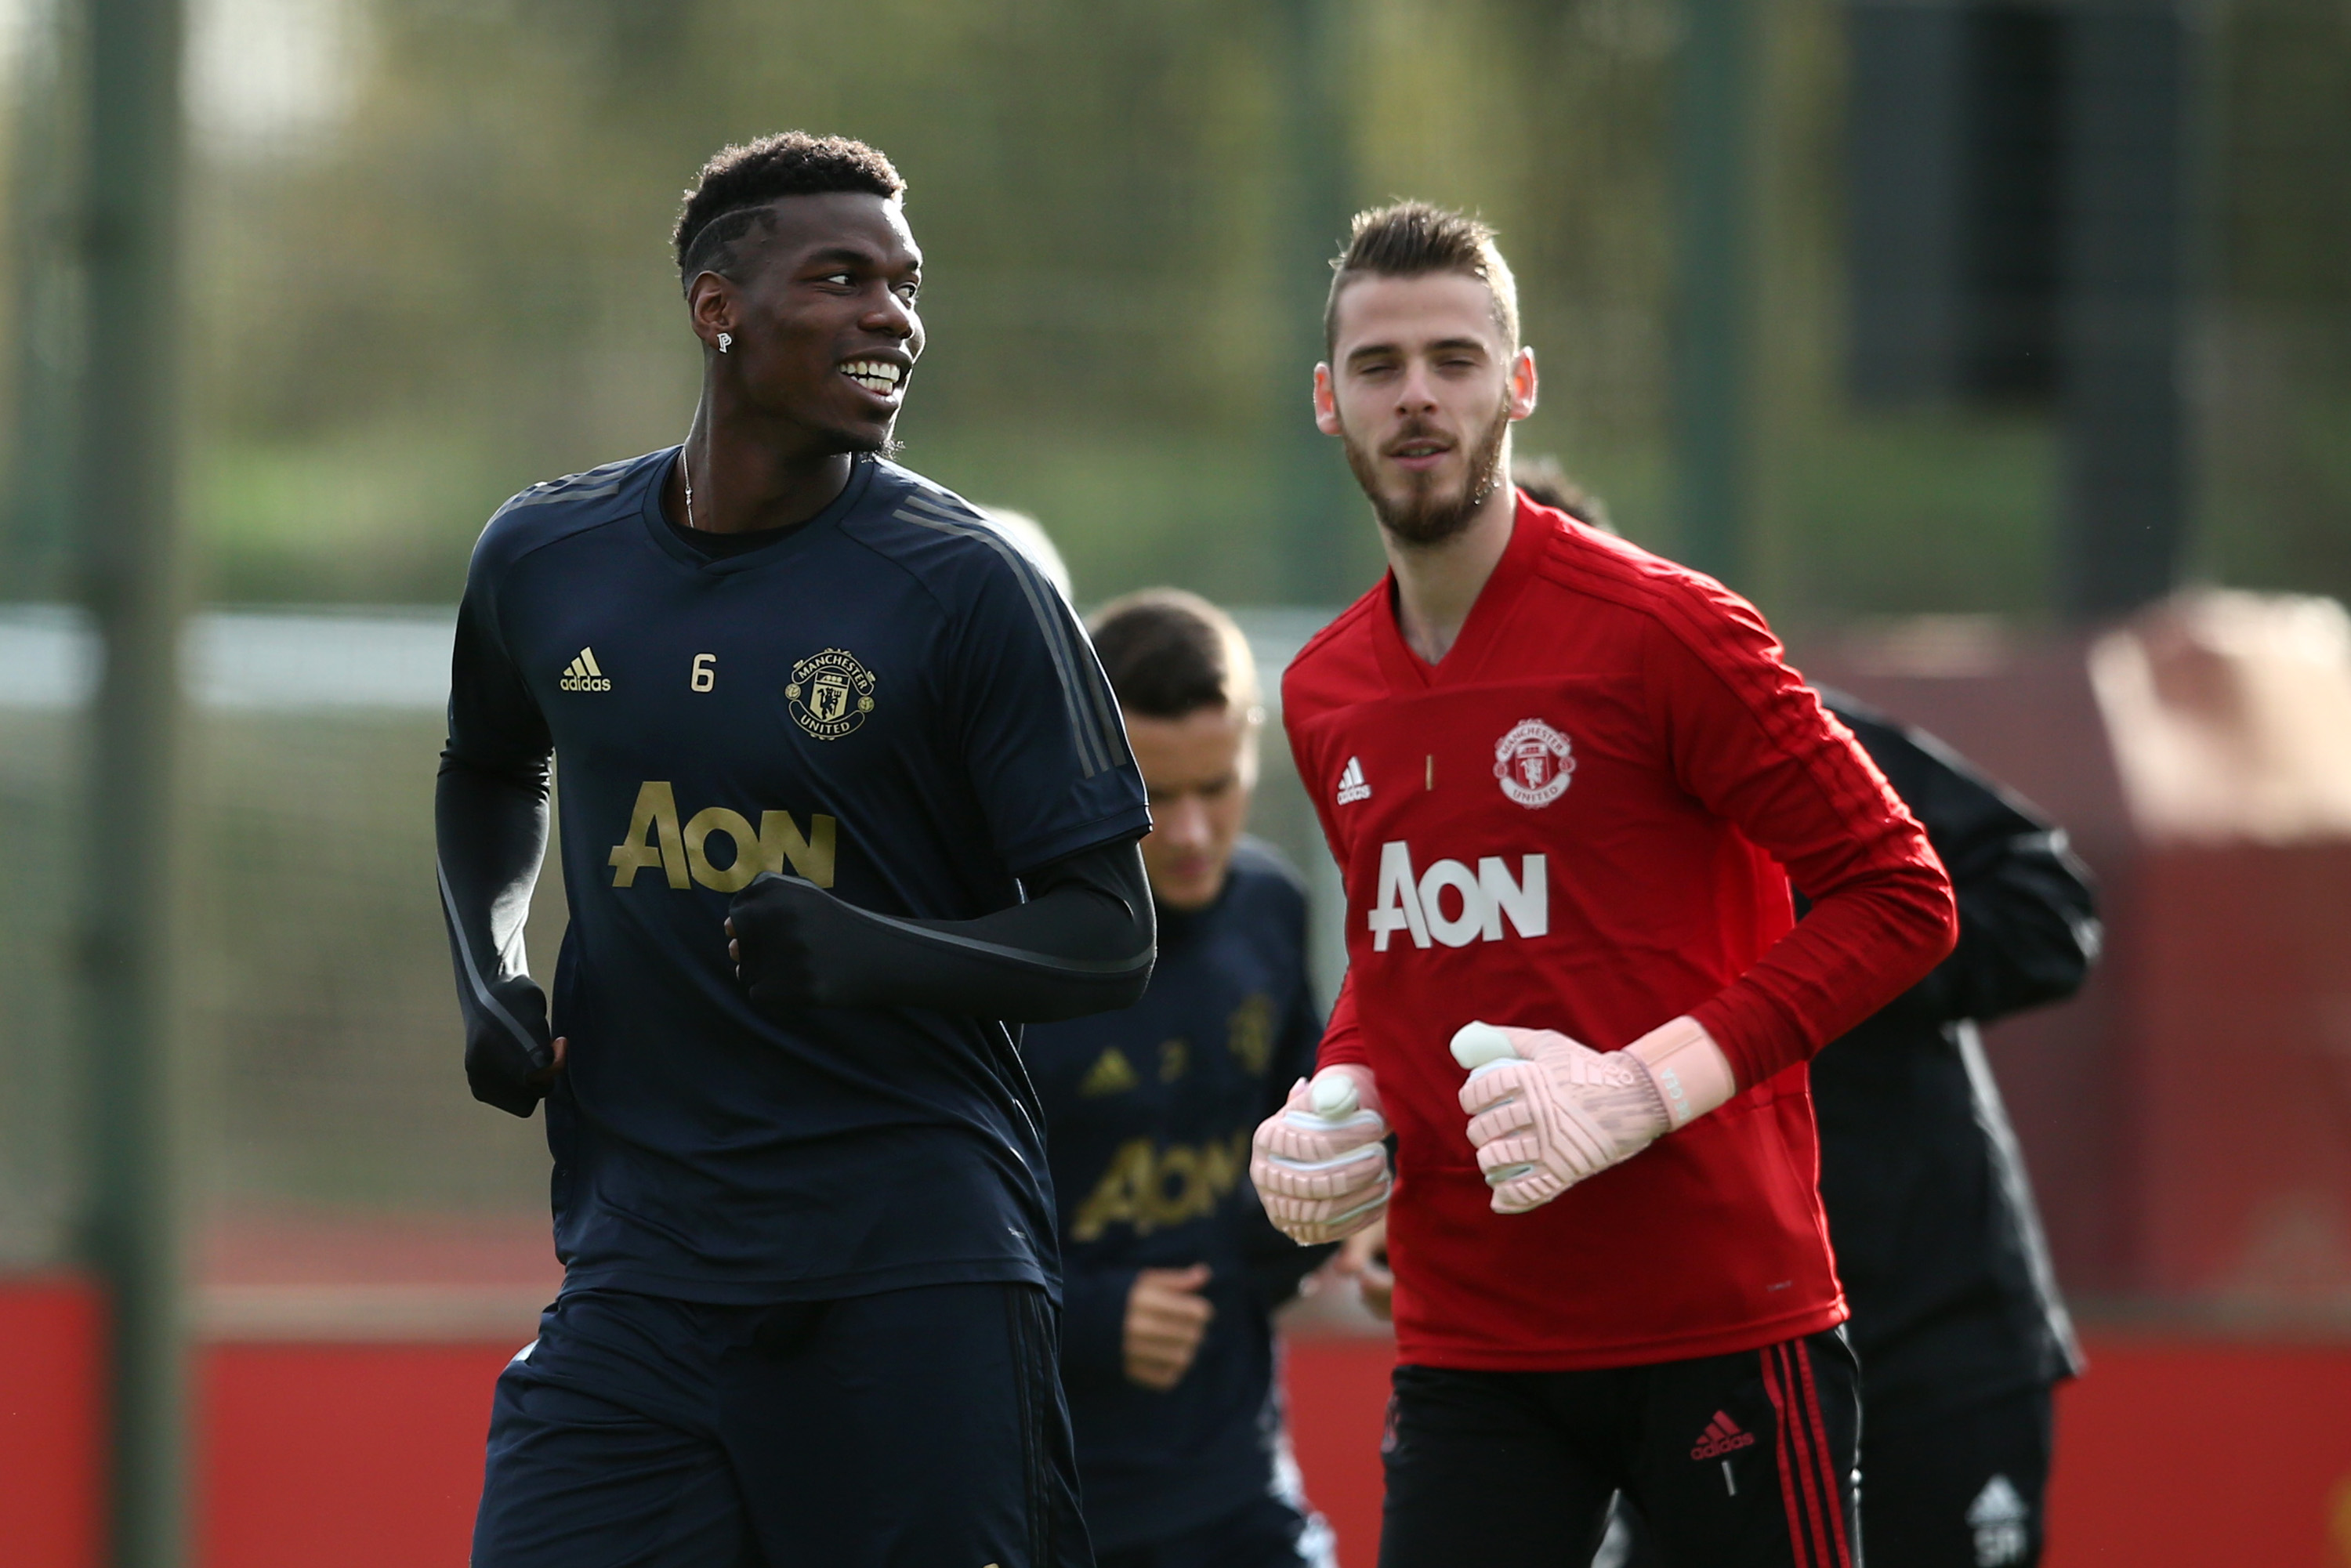 No Pogba and De Gea for Manchester United (Photo by Jan Kruger/Getty Images)